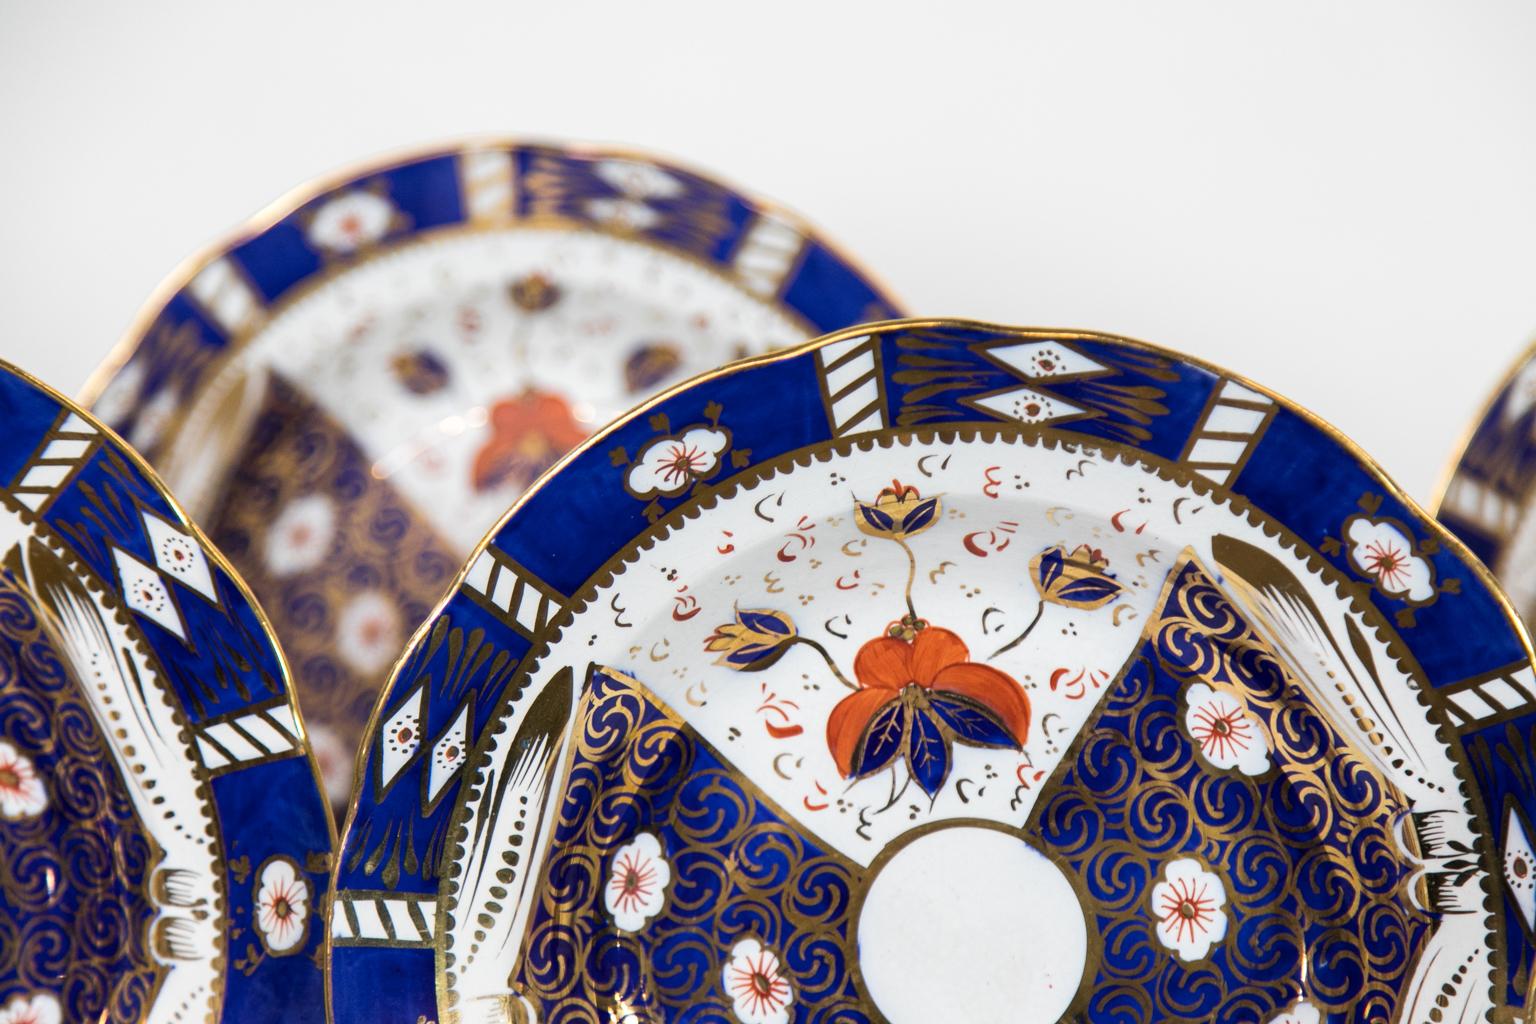 These twelve English Staffordshire soup plates are decorated with stylized flowers with alternating lozenges containing gilt arabesques and whimsical dashes. The gilded highlighting has survived in superb condition, and the overall condition is